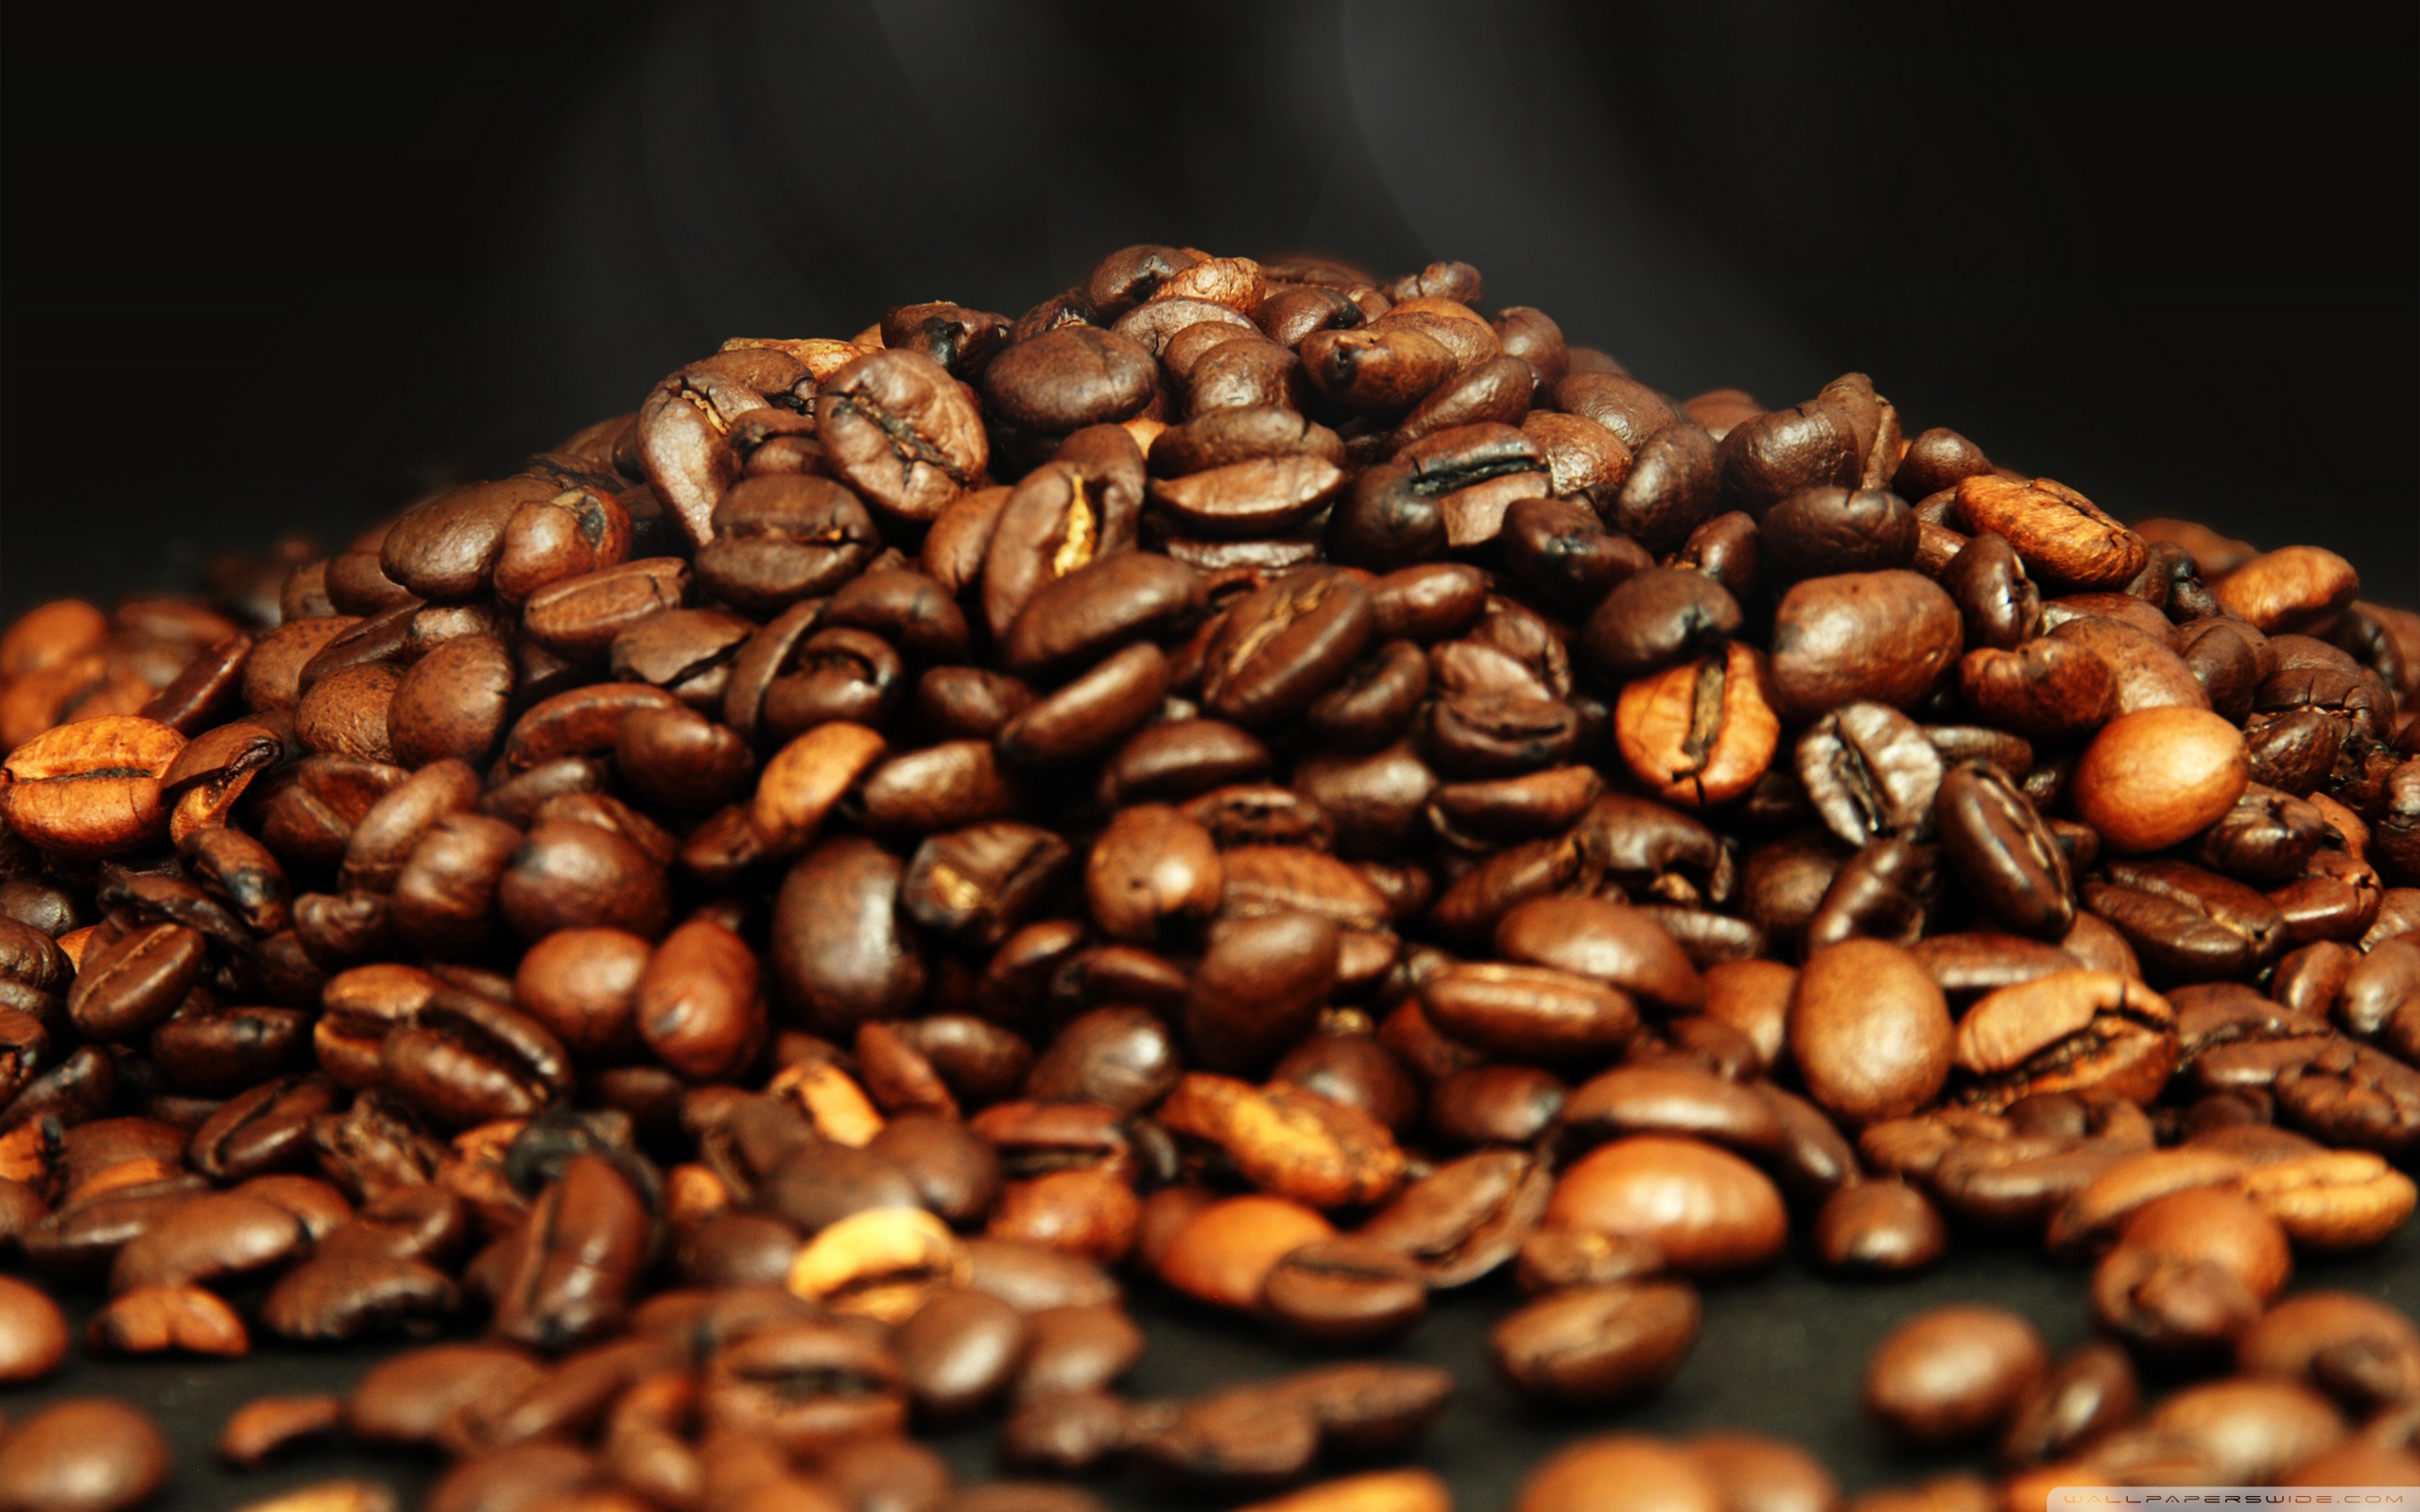 Coffee Beans 4 Wallpaper   HQ Free Wallpapers download 100 high